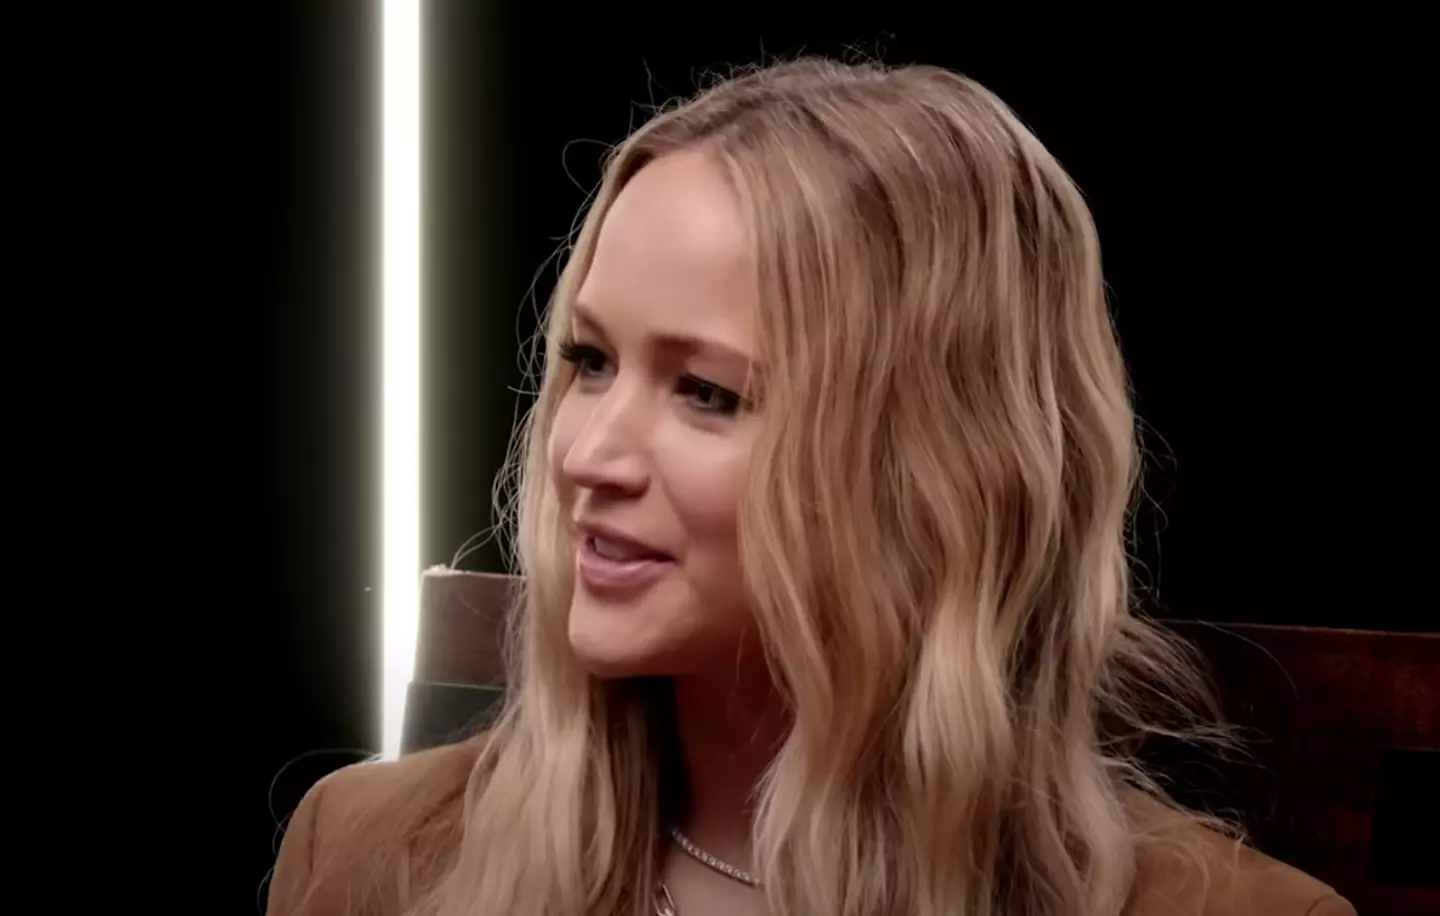 Jennifer Lawrence has addressed why there's been a lack of female directors in the industry.